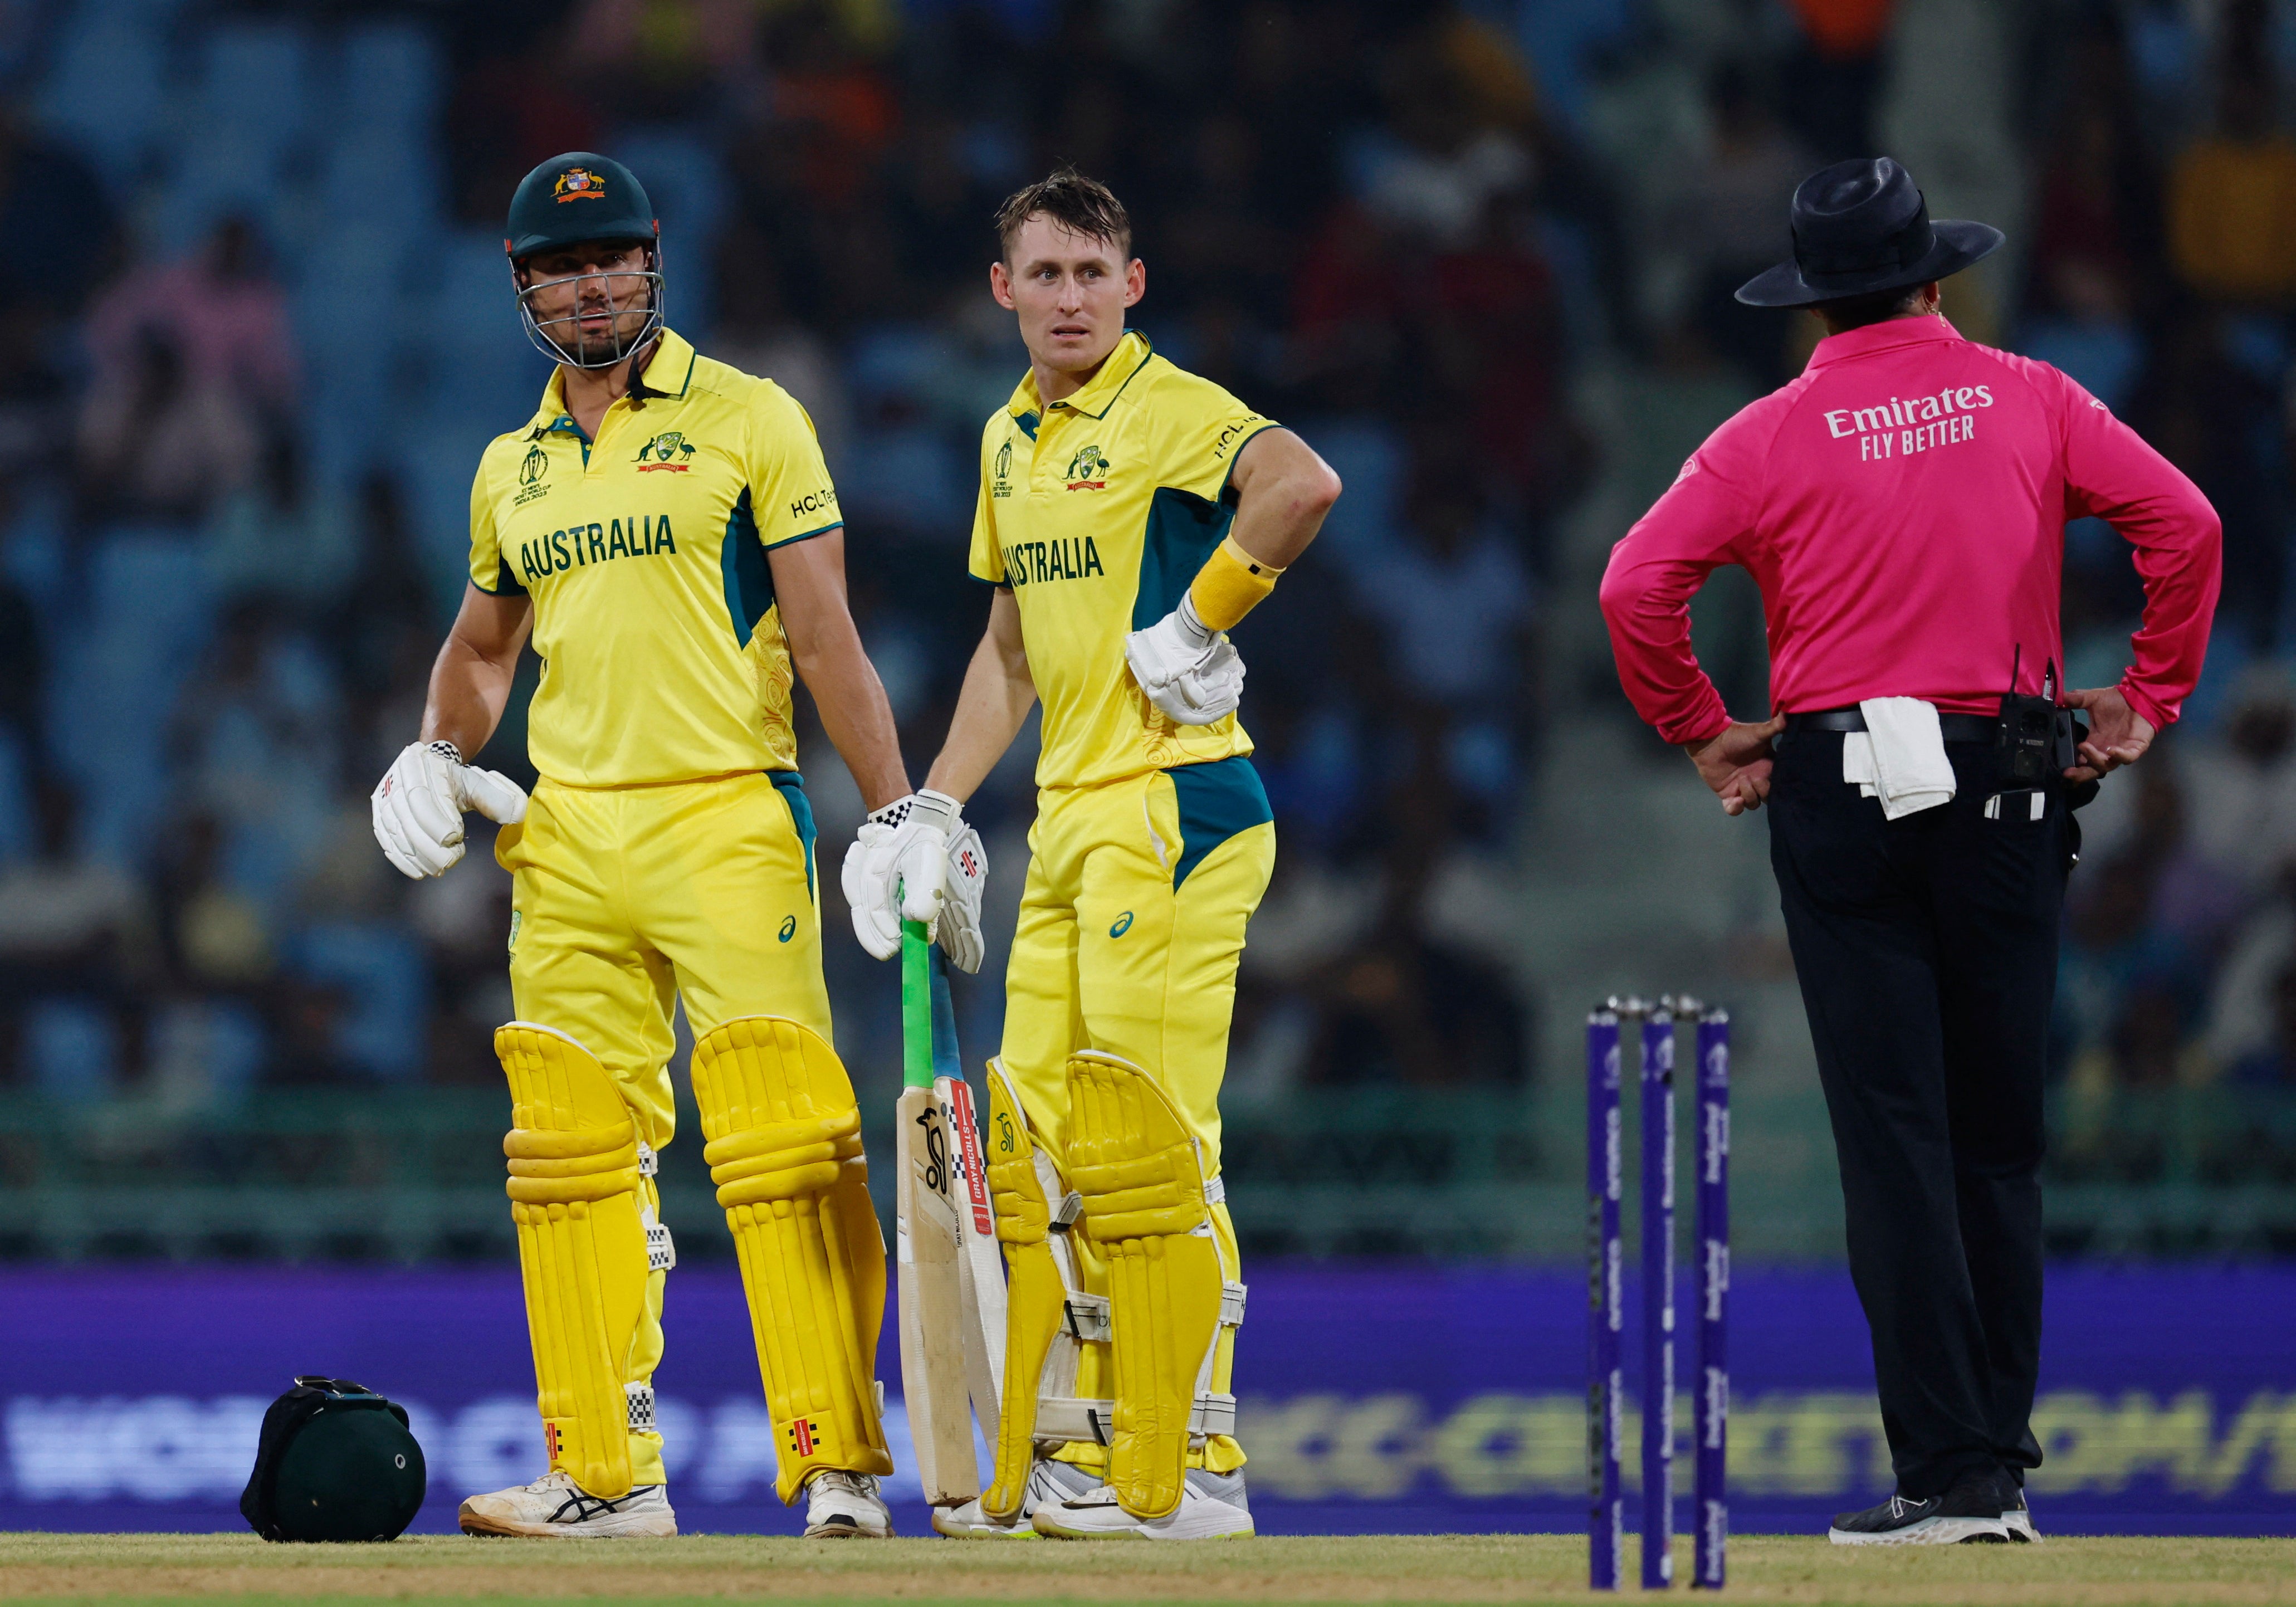 Australia's Marcus Stoinis reacts after losing his wicket